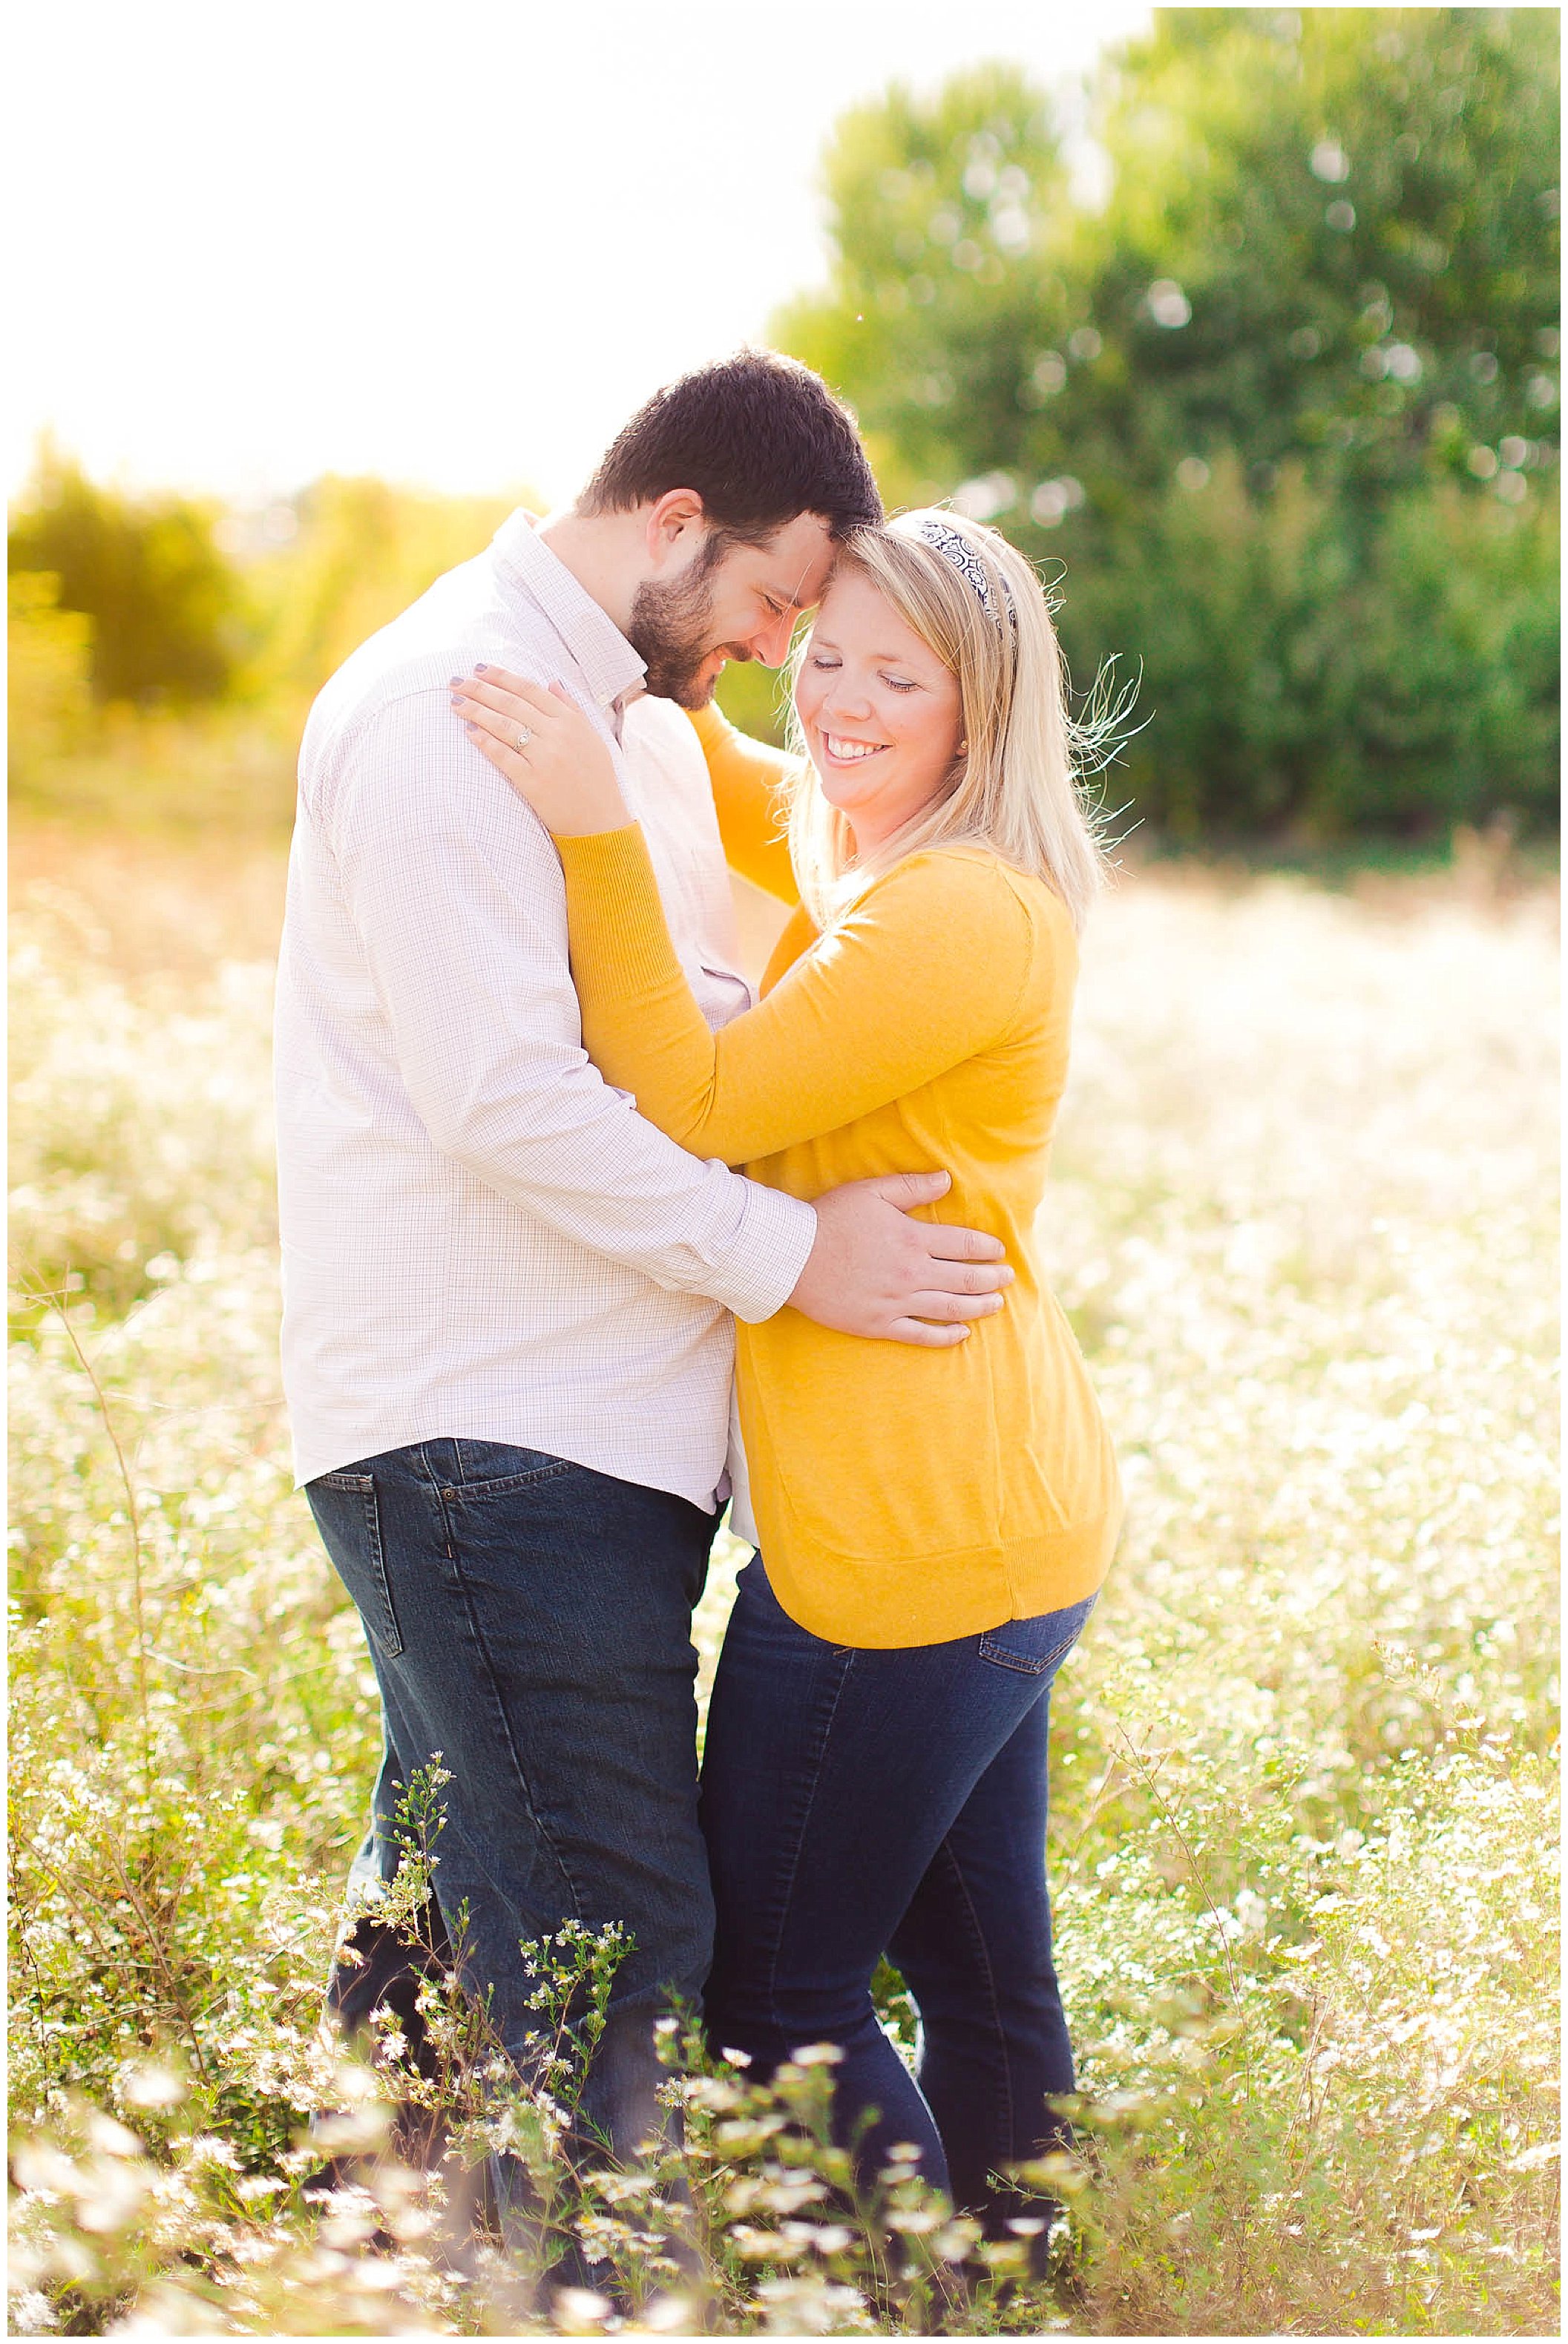 Sunshine filled engagement session in a field of wildflowers, Fort Wayne Indiana Wedding Photographer_0003.jpg